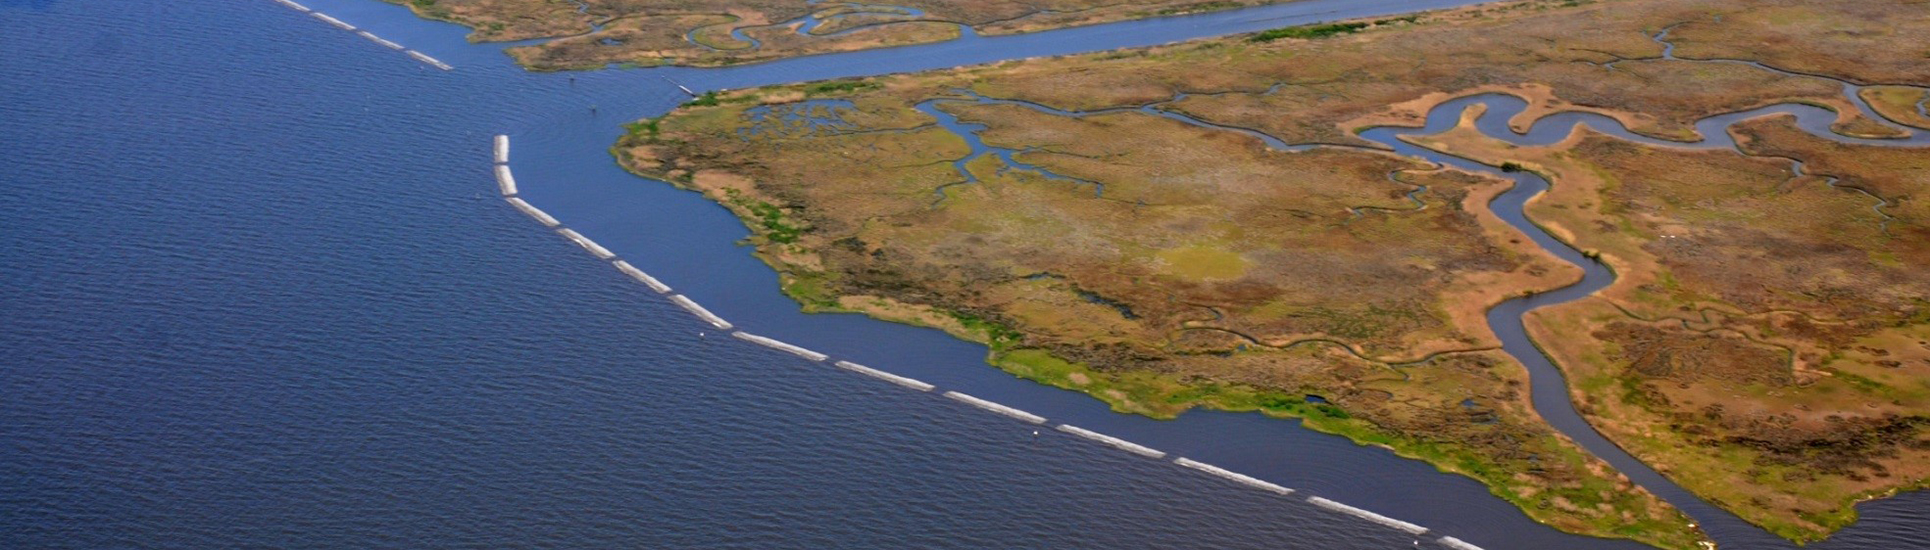 Aerial photo of the Mississippi coast with a living shoreline project that includes natural and artificial breakwater material and marsh creation to reduce shoreline erosion.